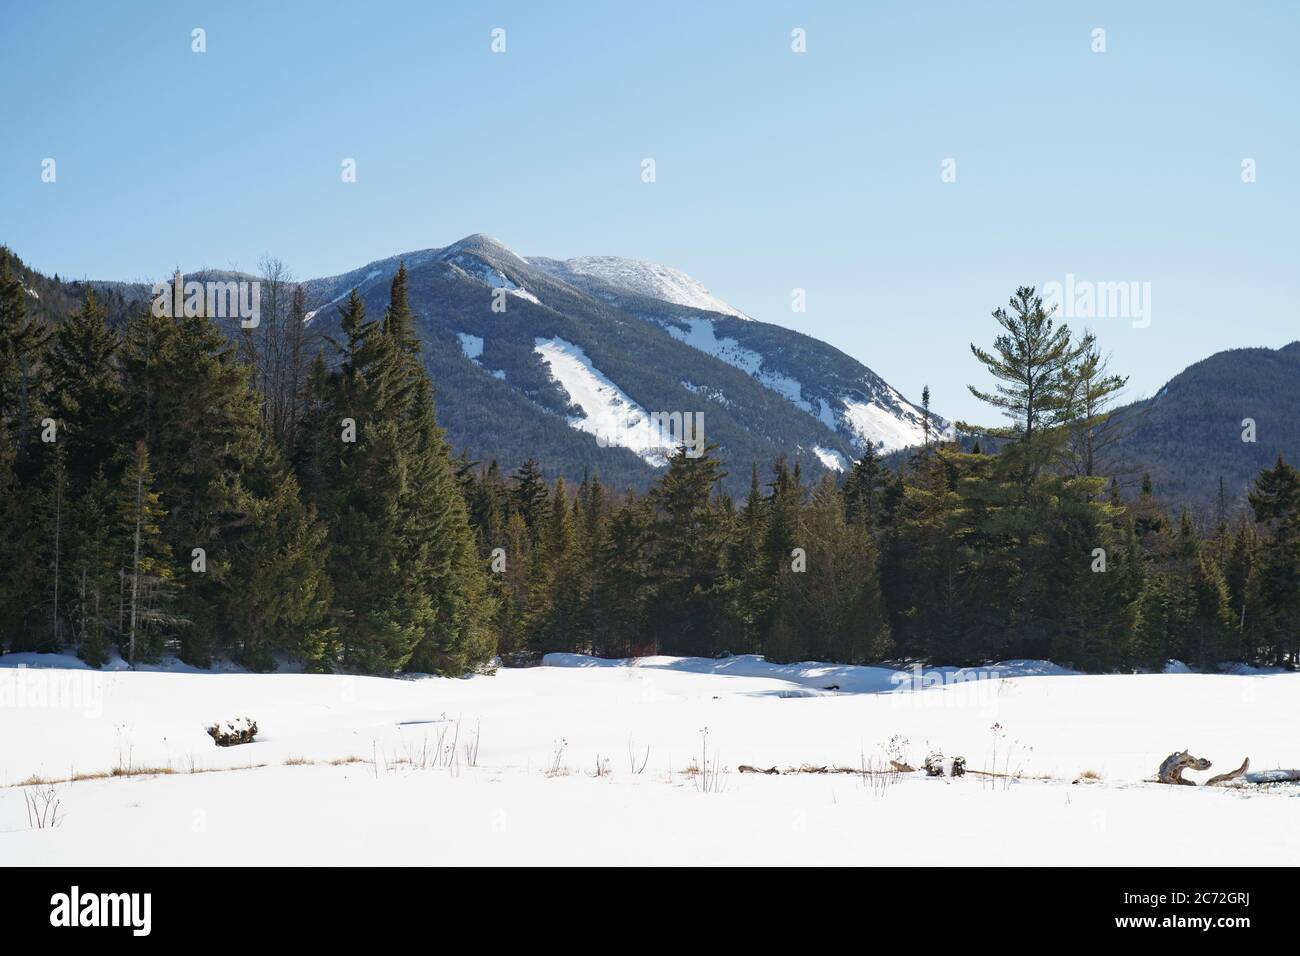 Marcy Dam, Marcy Dam Pon, Inverno, Frozen, Snow-Covered, Marcy stagno, Monte Colden, Inverno, Adirondack Mountains, High Peaks, Inverno, New York Foto Stock